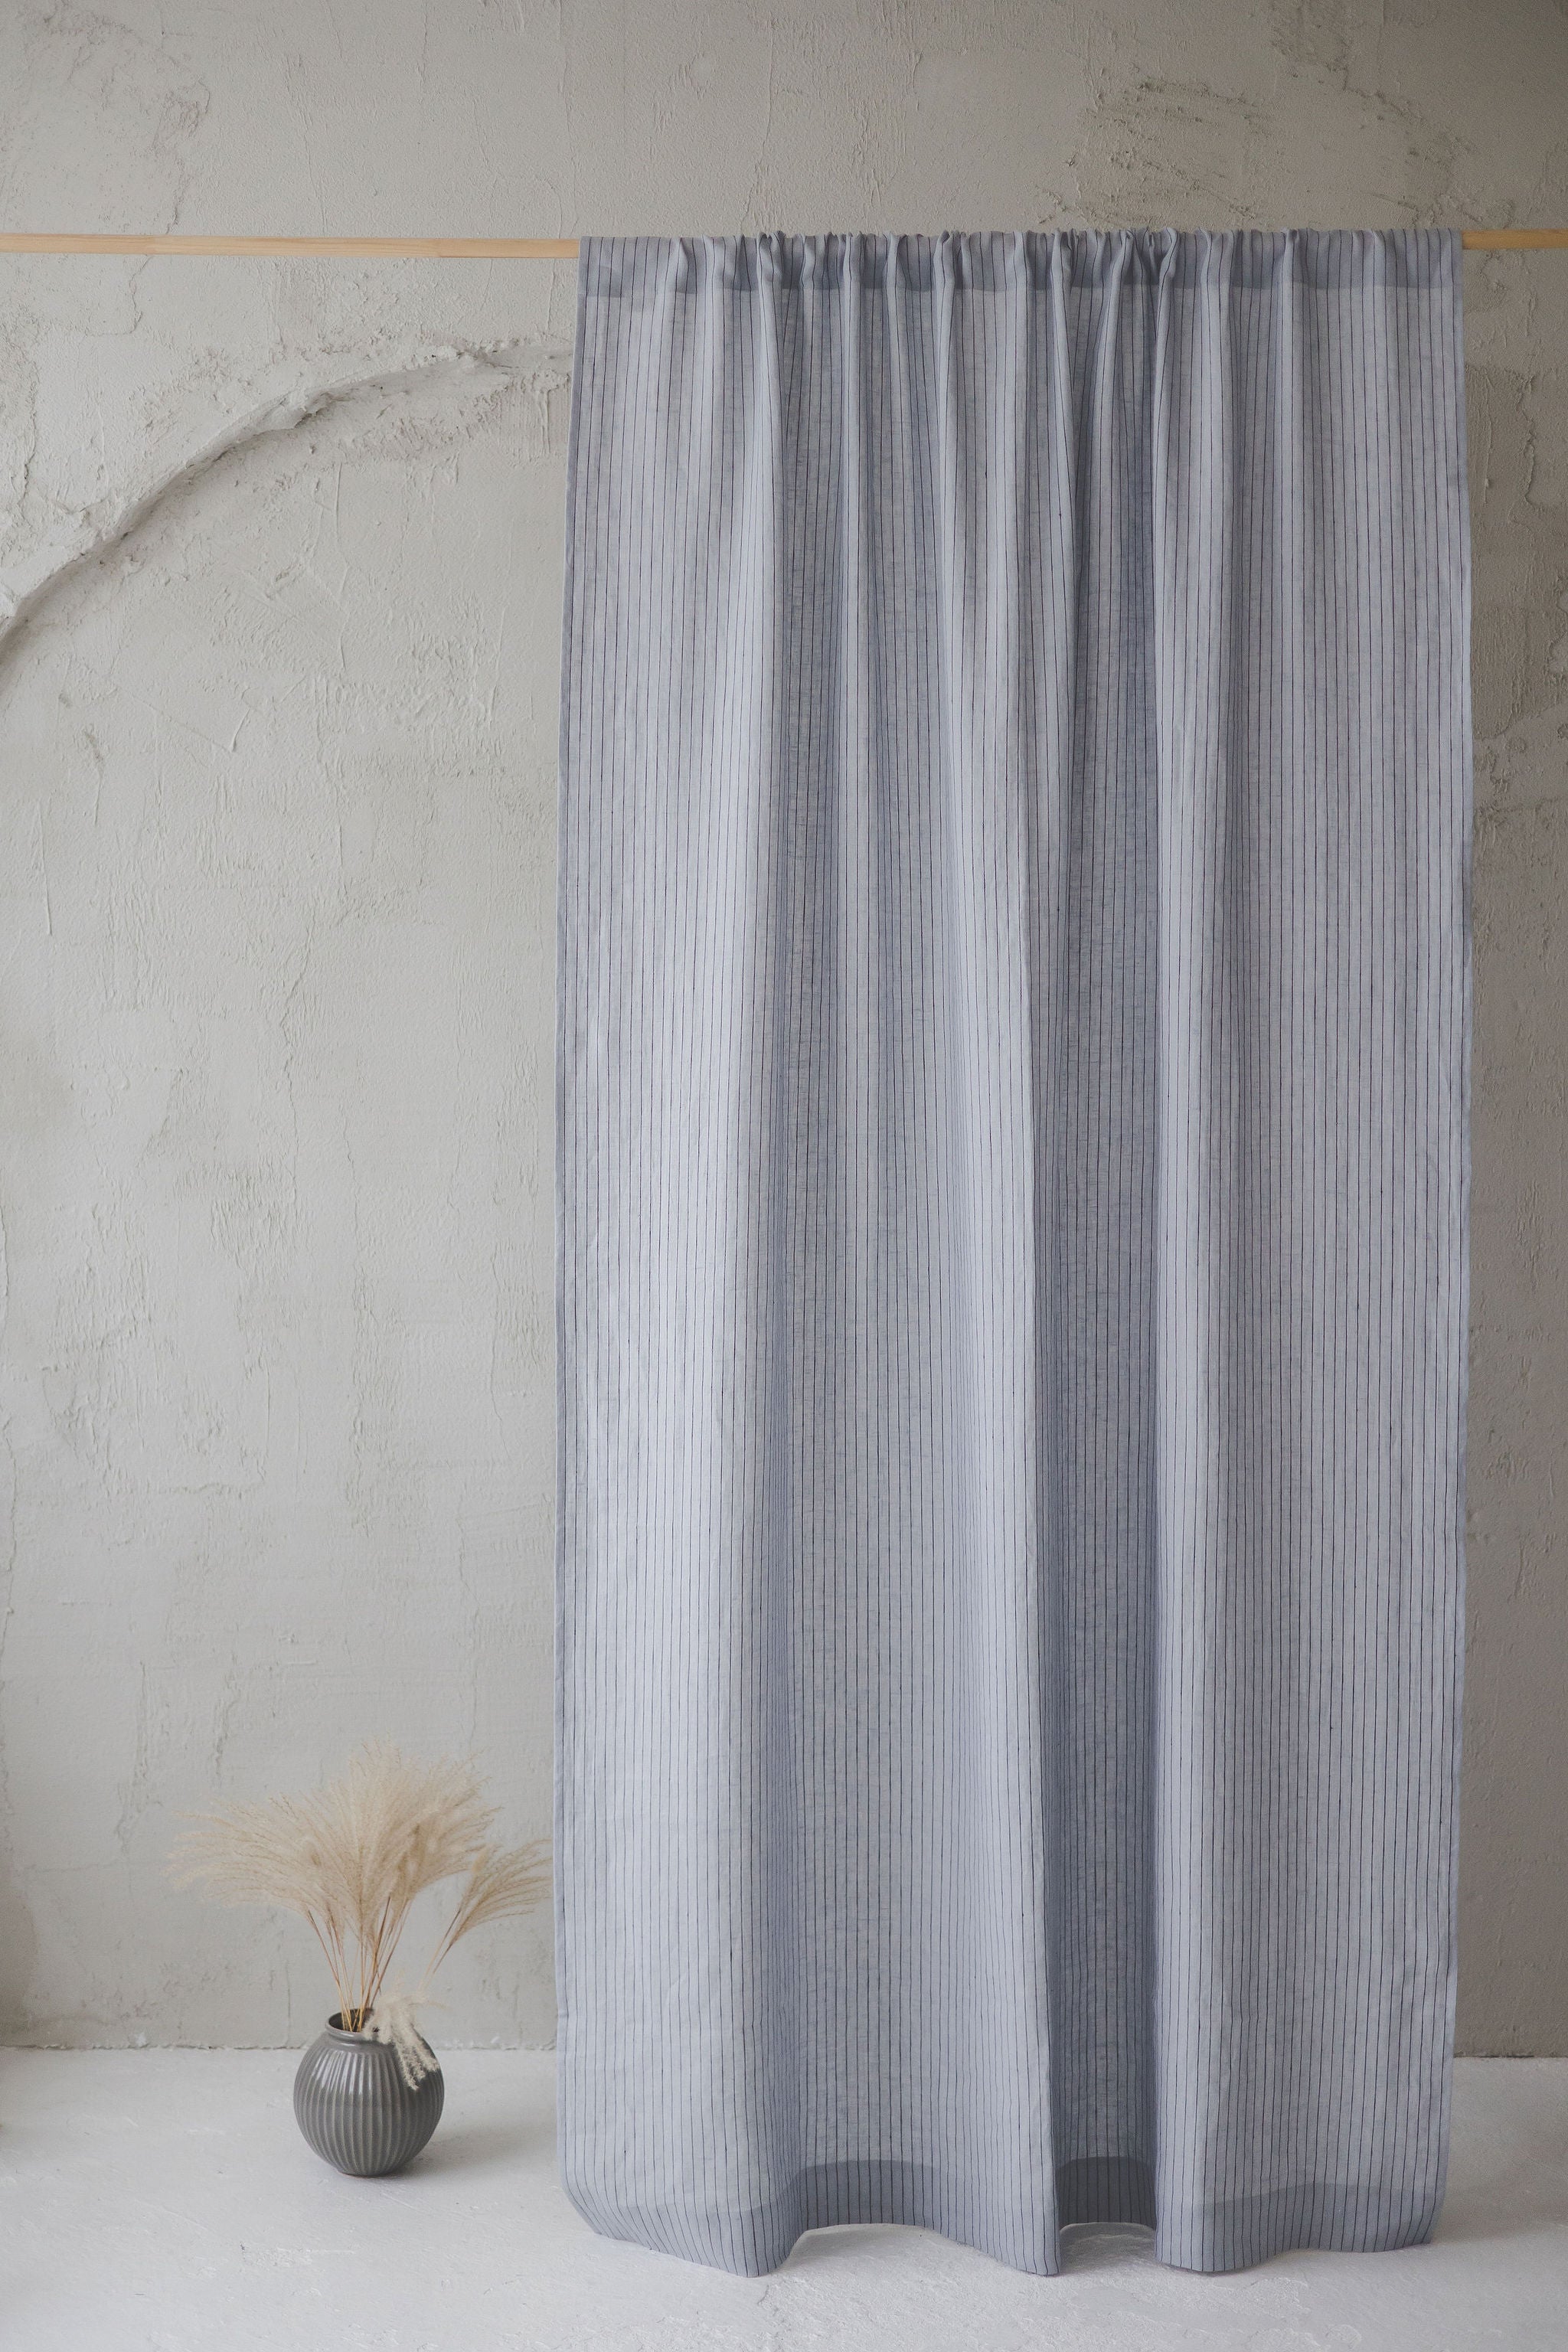 Grey linen curtain with black stripes